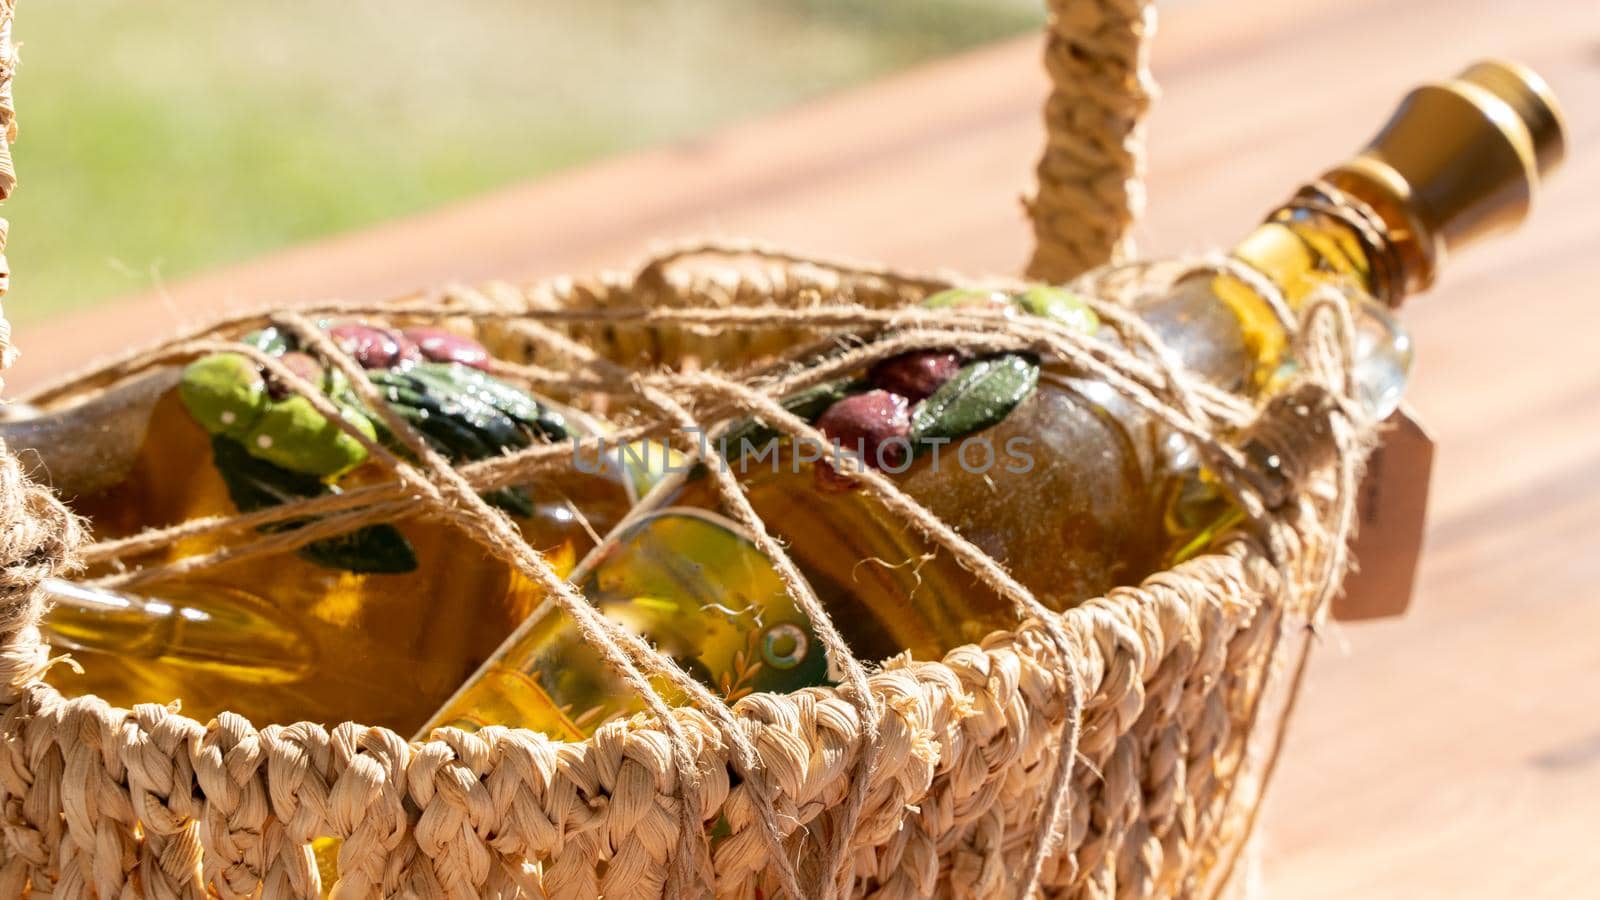 Olive oil in a glass bottle in a braided straw basket. High quality photo